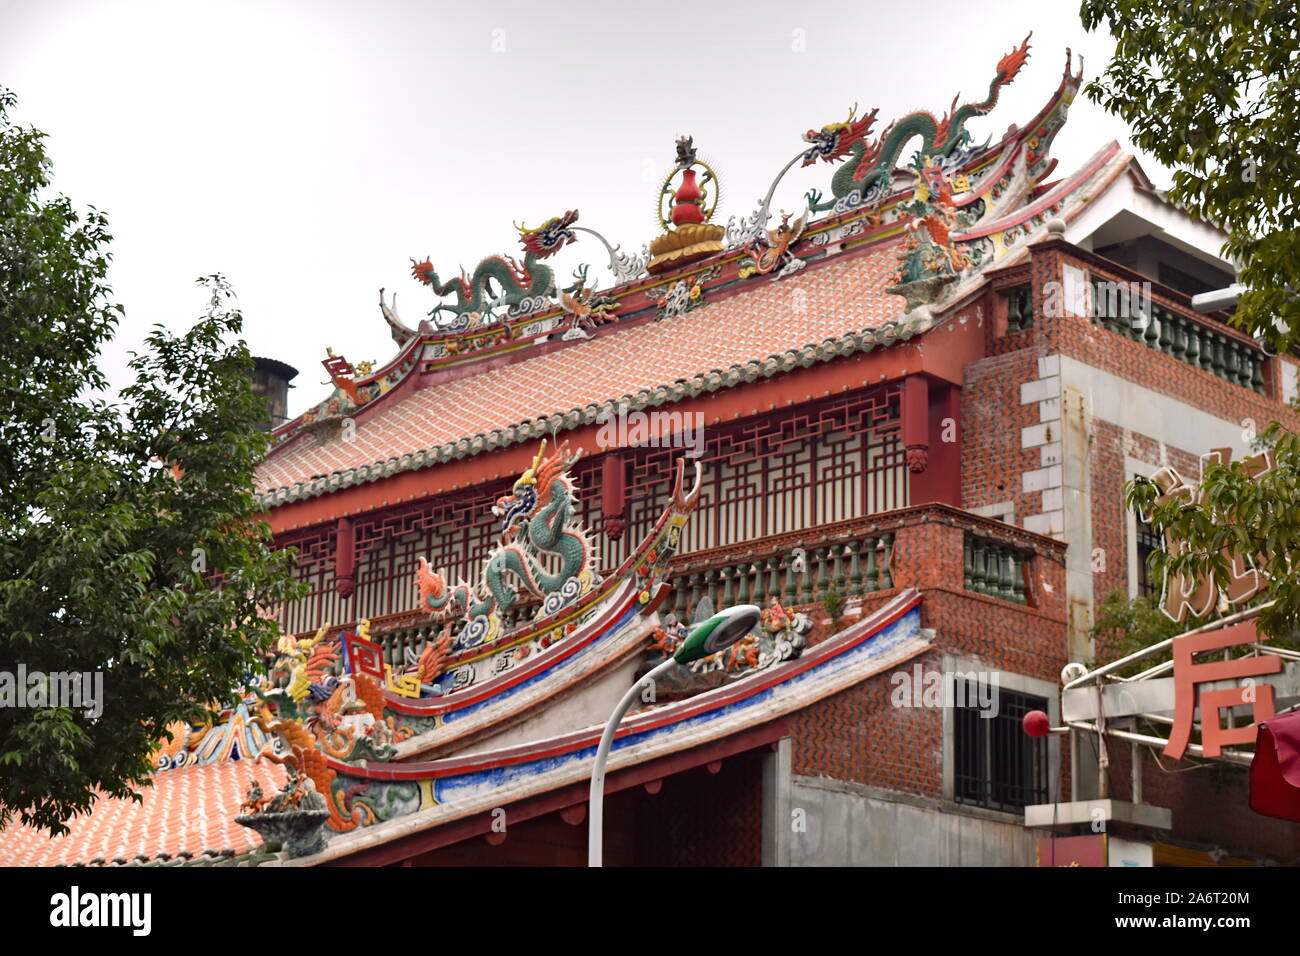 Multitude of dragons decorating the roofs of the historical Tonghuai Guanyue temple of Chinese native religion in downtown Quanzhou Stock Photo